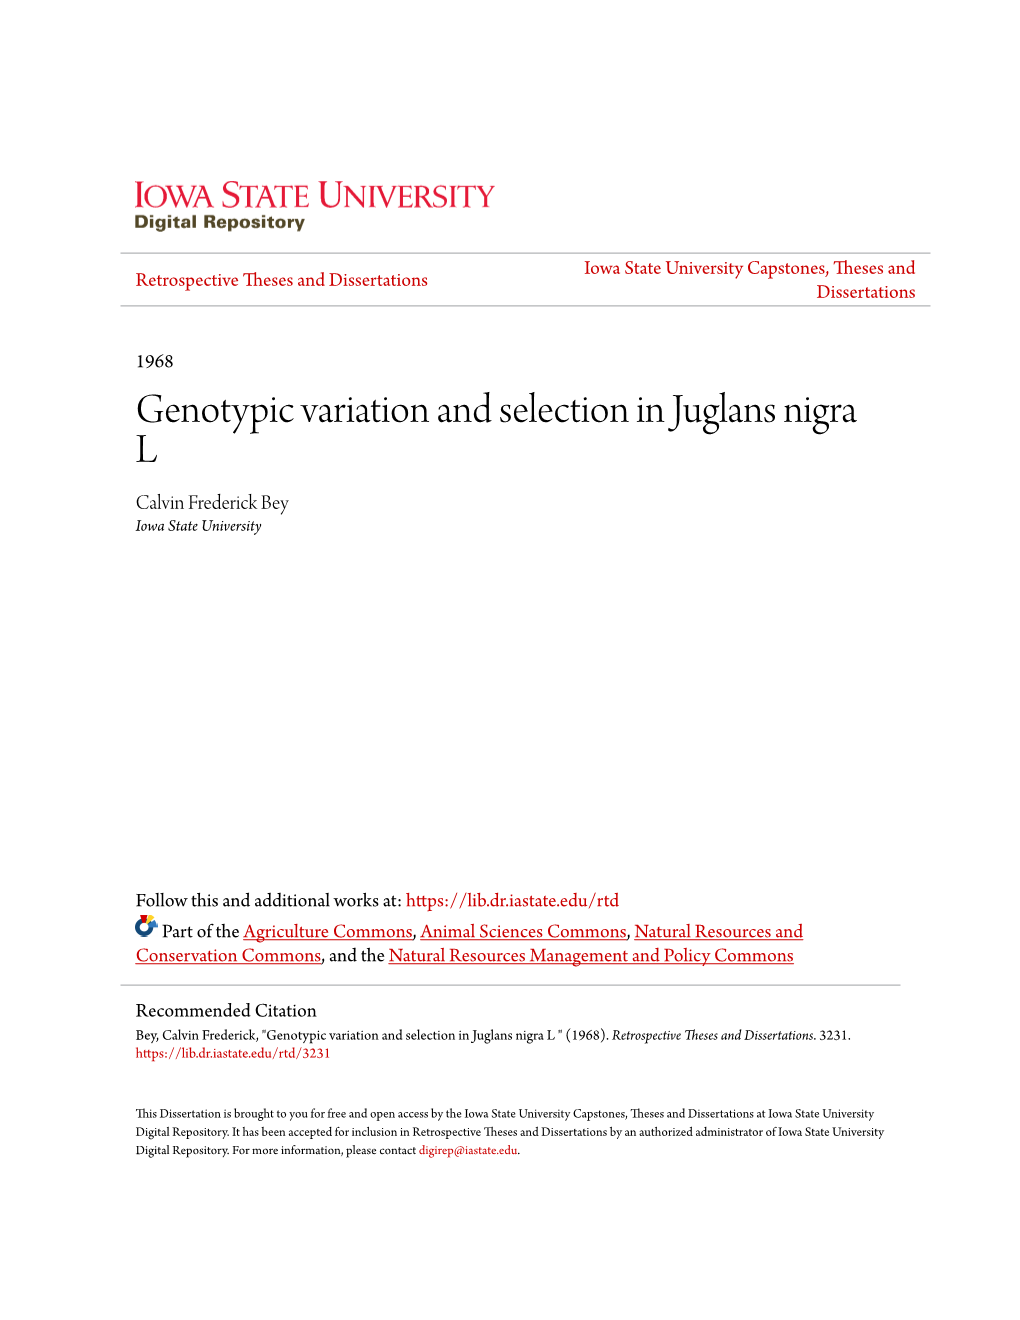 Genotypic Variation and Selection in Juglans Nigra L Calvin Frederick Bey Iowa State University